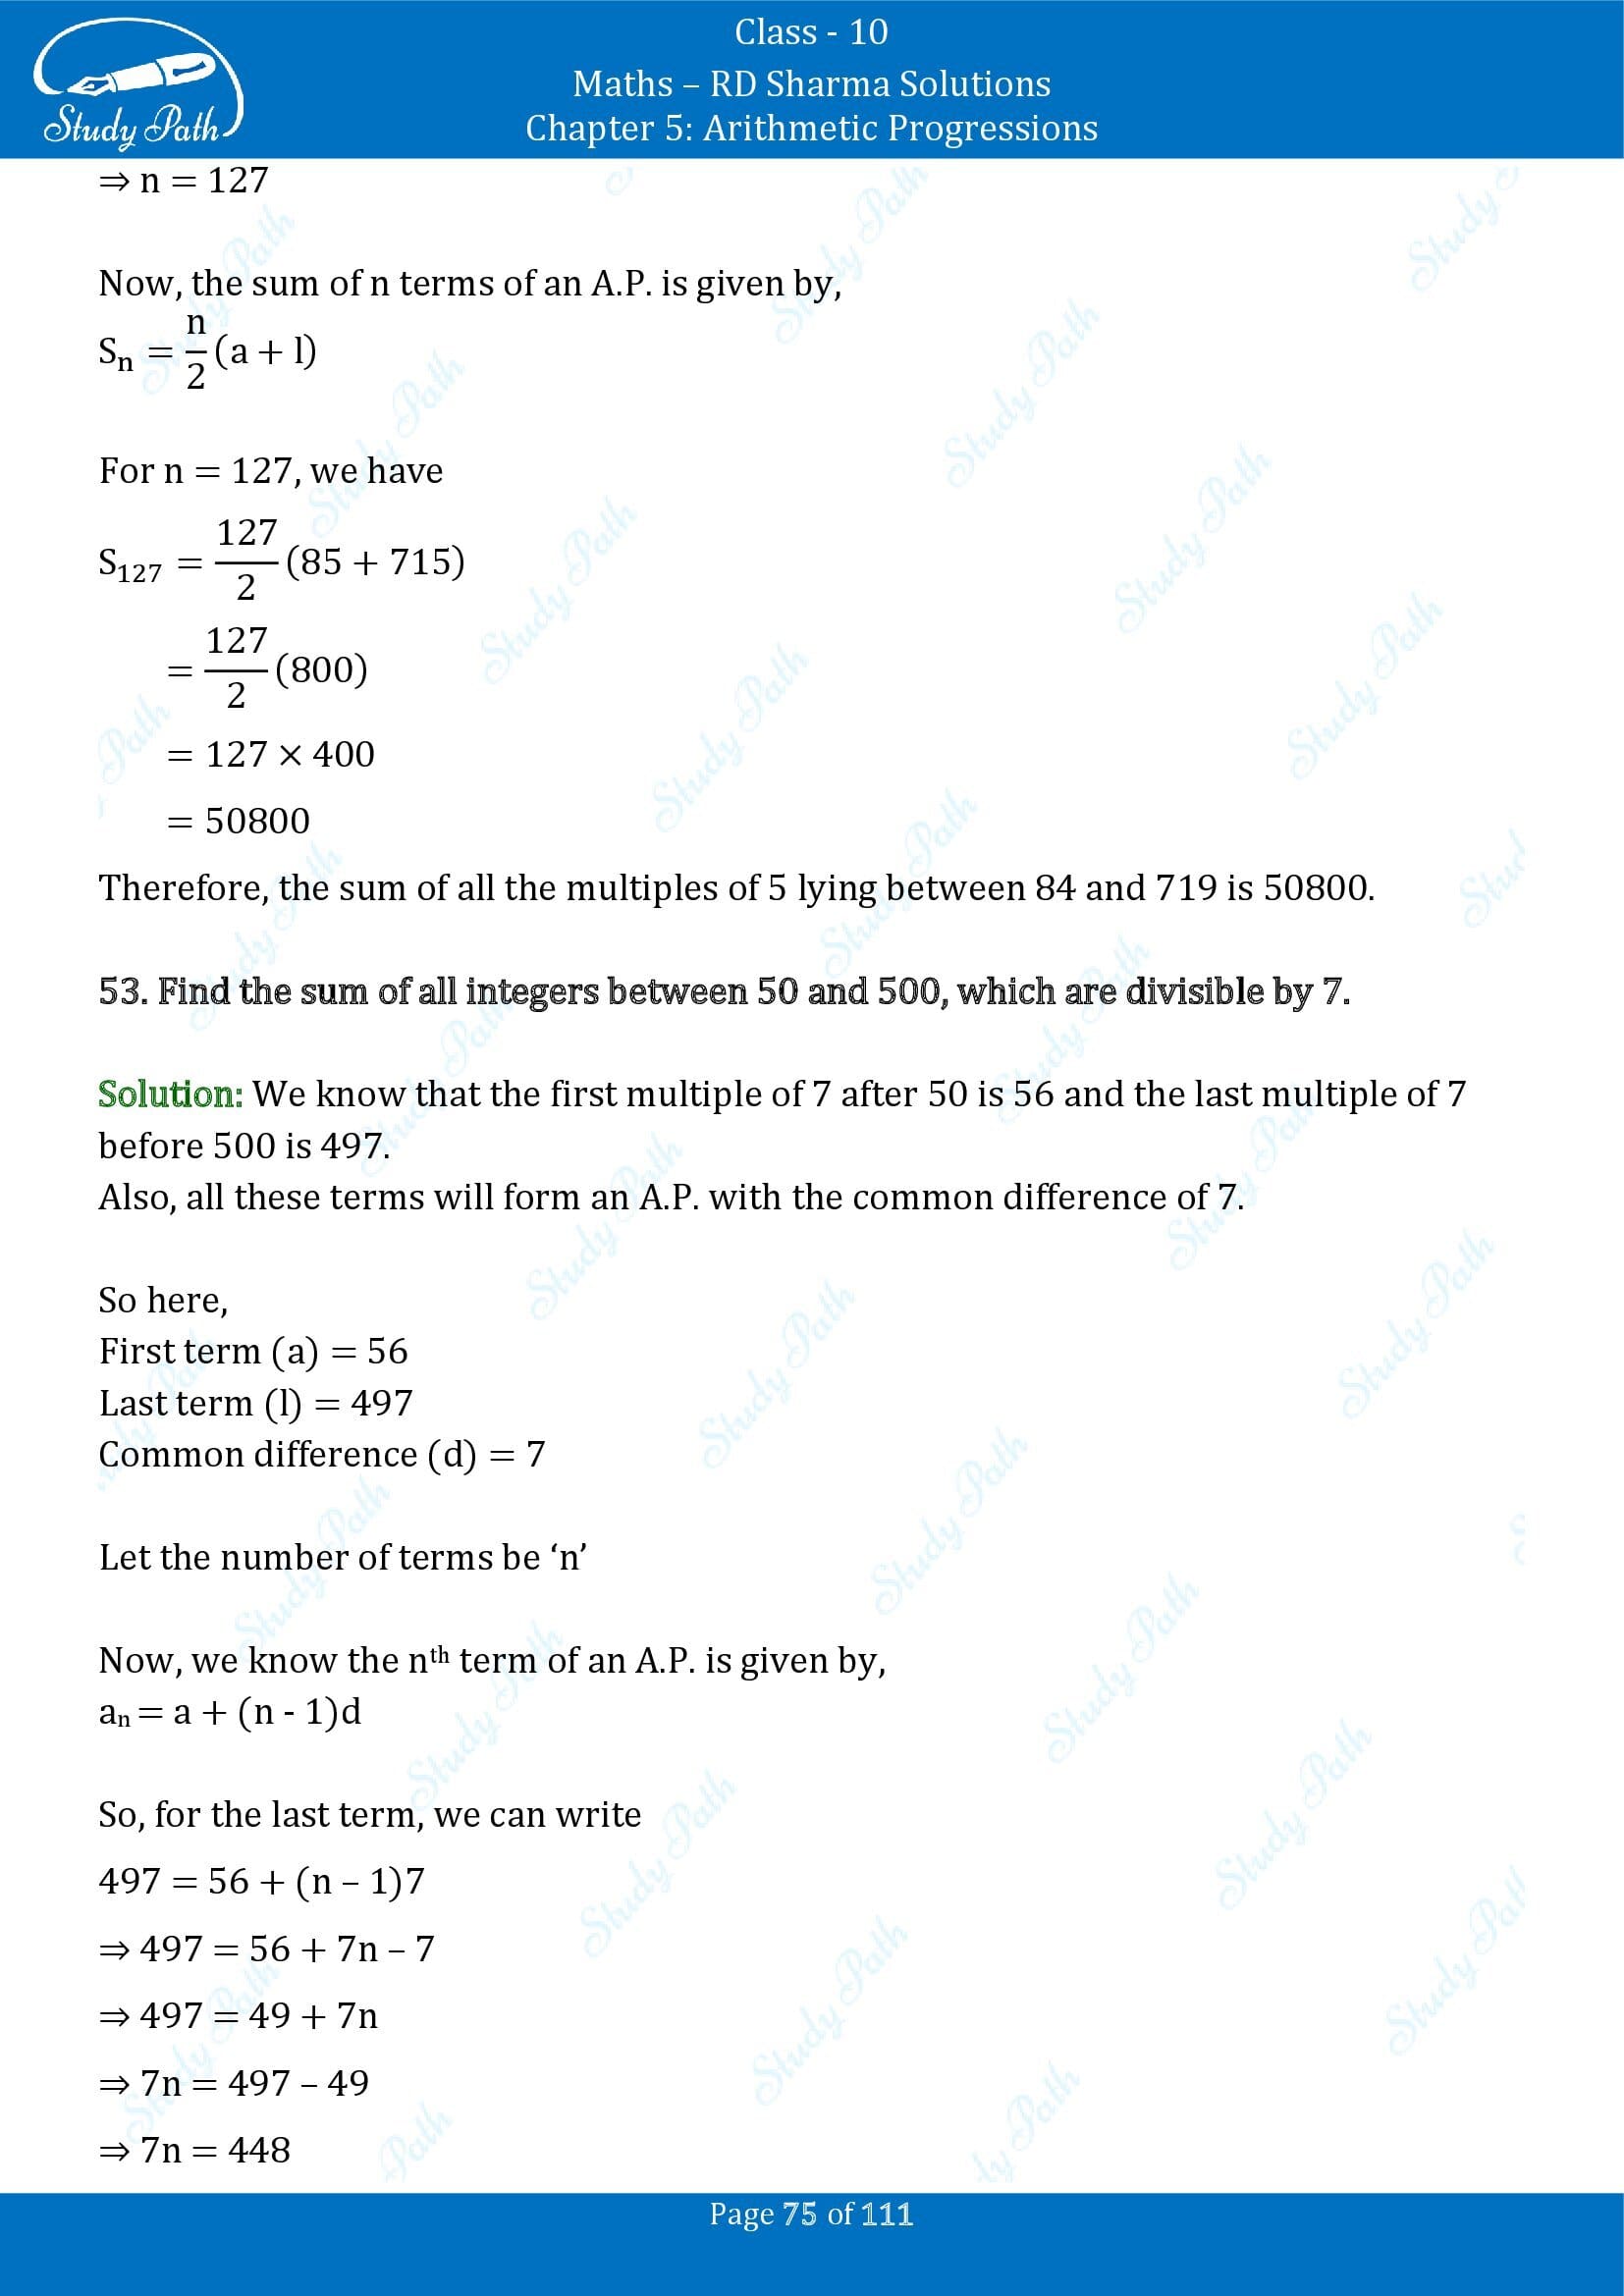 RD Sharma Solutions Class 10 Chapter 5 Arithmetic Progressions Exercise 5.6 00075